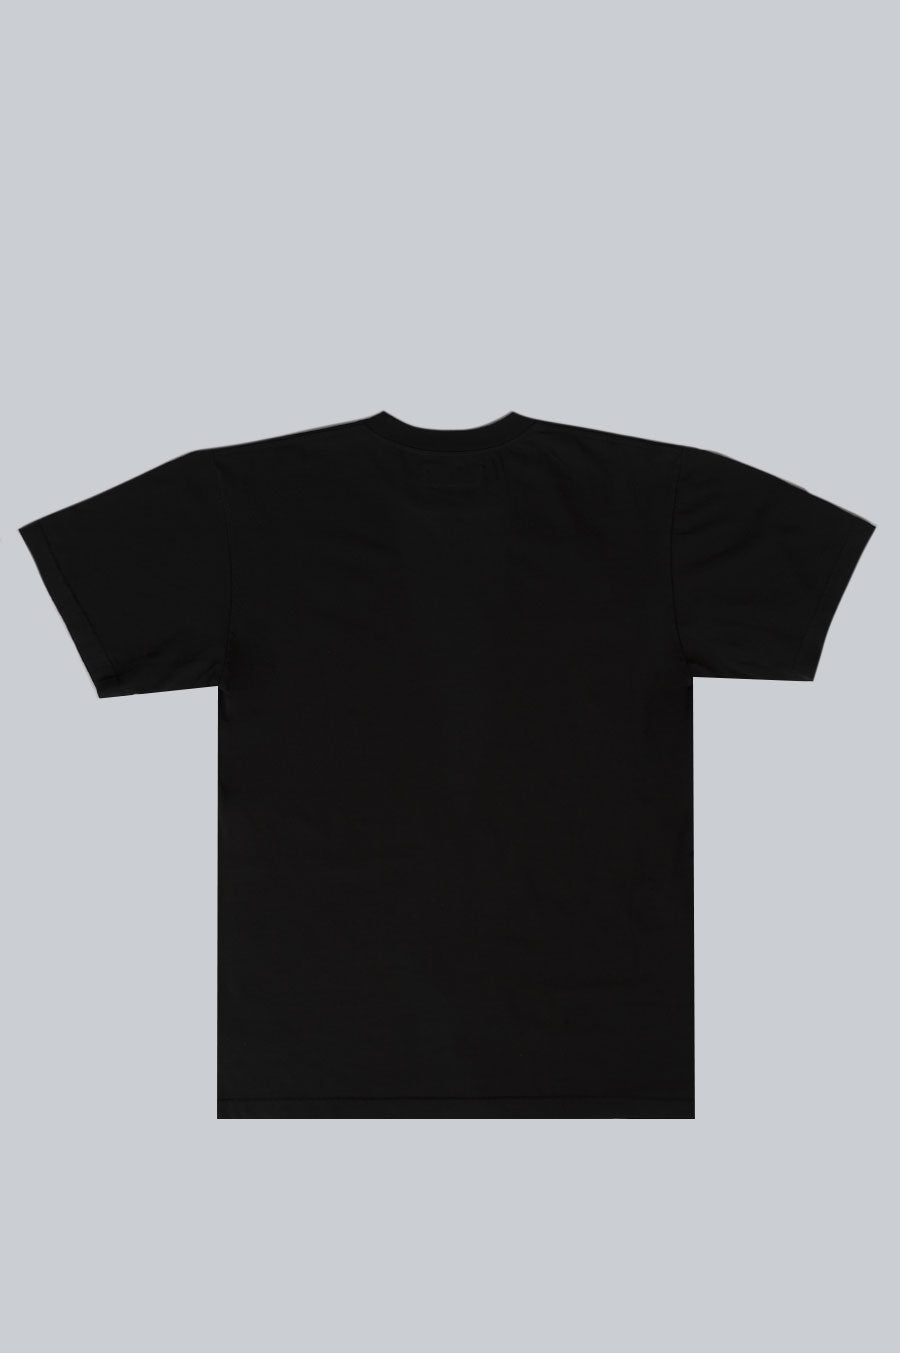 AFIELD OUT DAYDREAM T-SHIRT BLACK